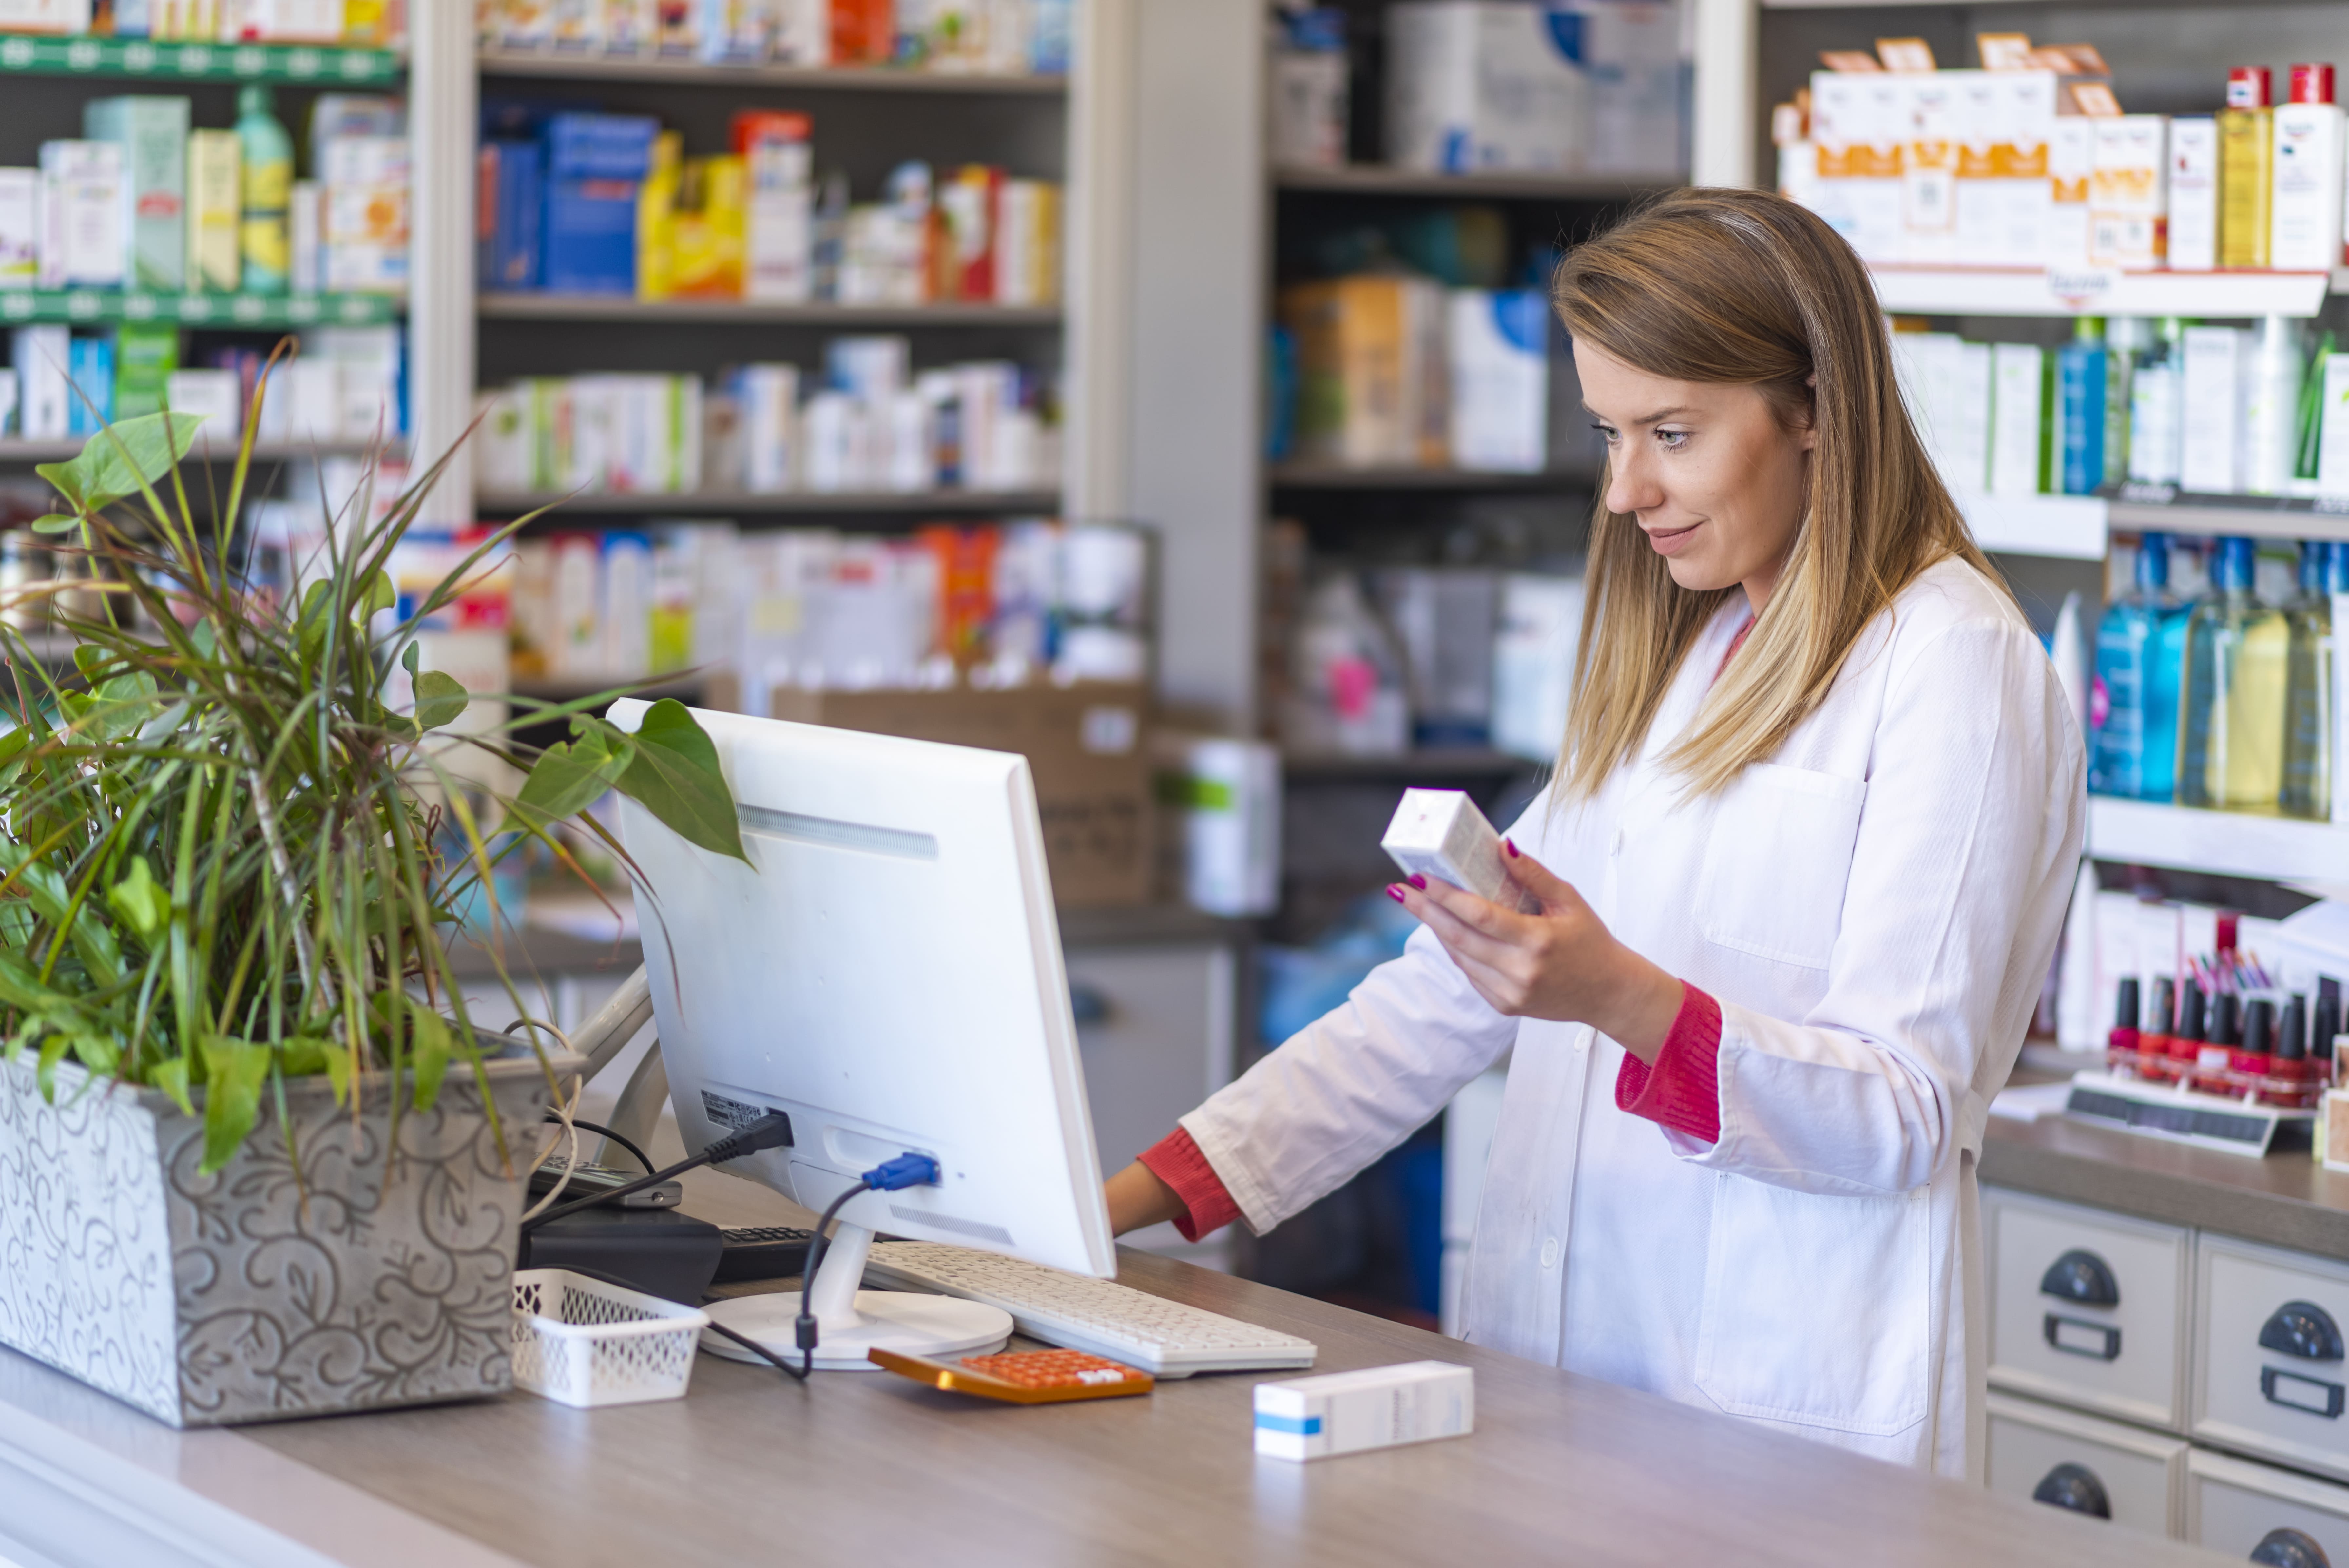 Should You Ever Use a Discount Coupon for Prescriptions if You Have Insurance? | America’s Pharmacy